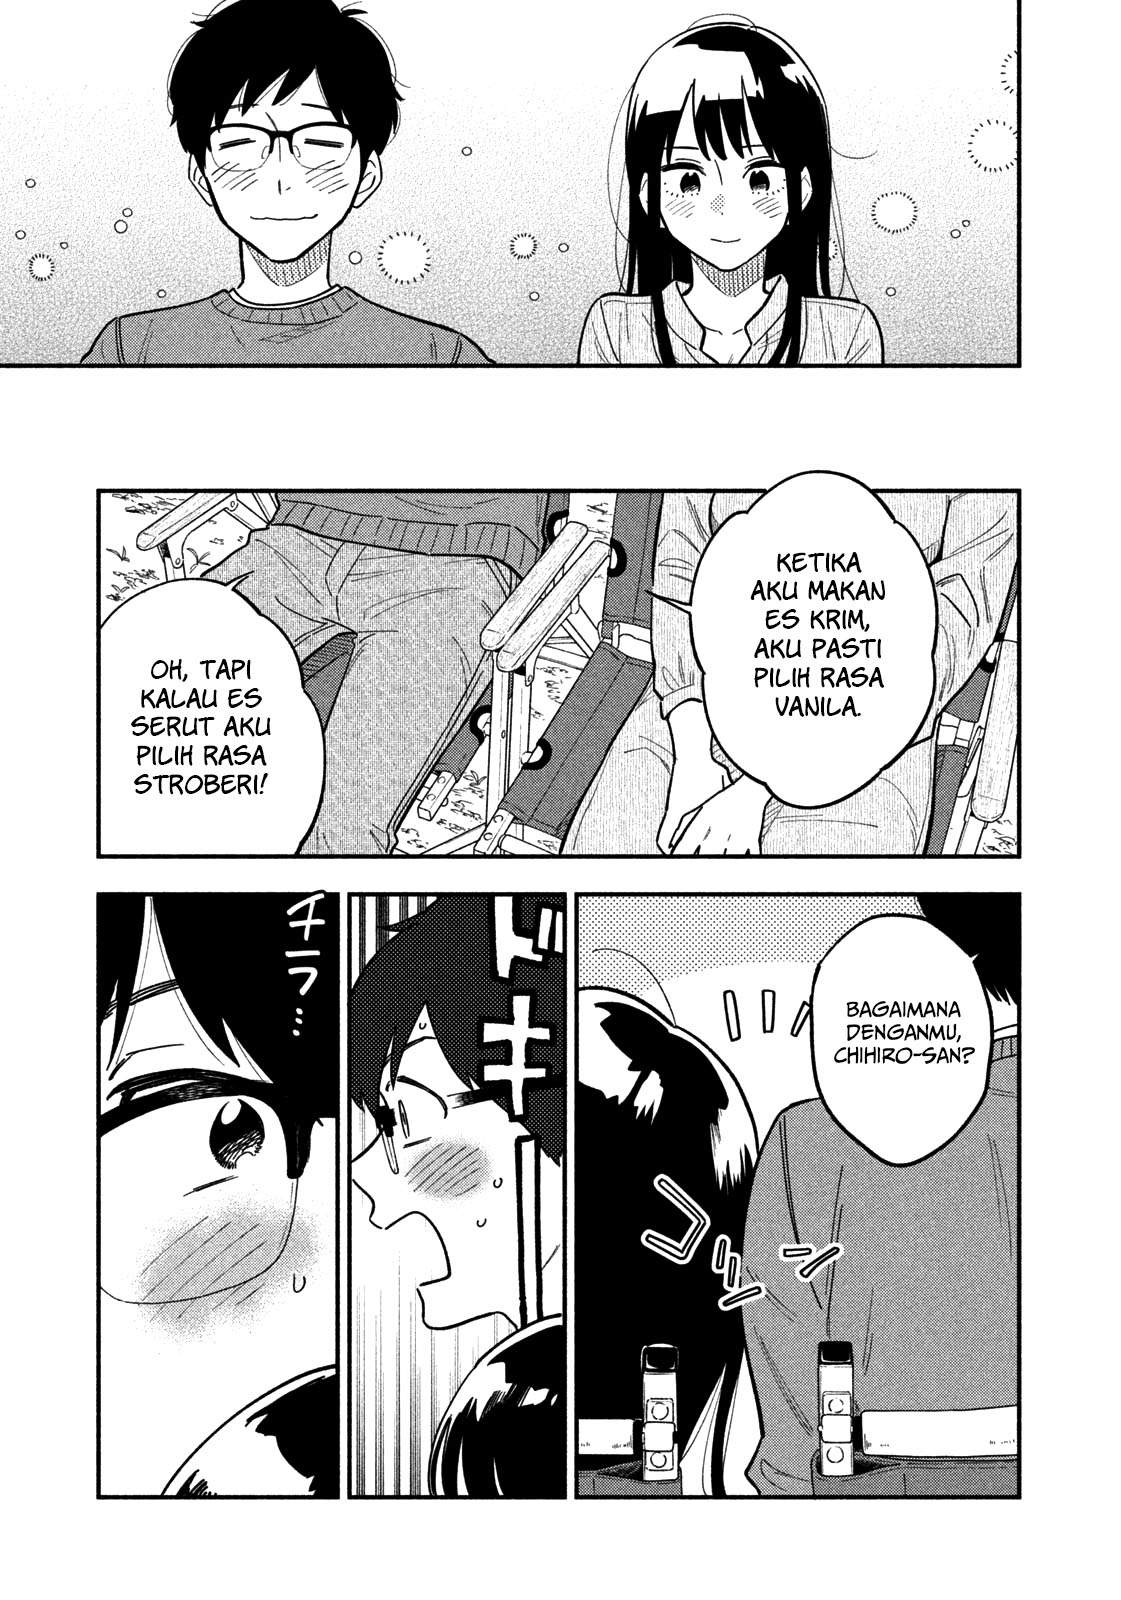 A Rare Marriage: How to Grill Our Love Chapter 2 24